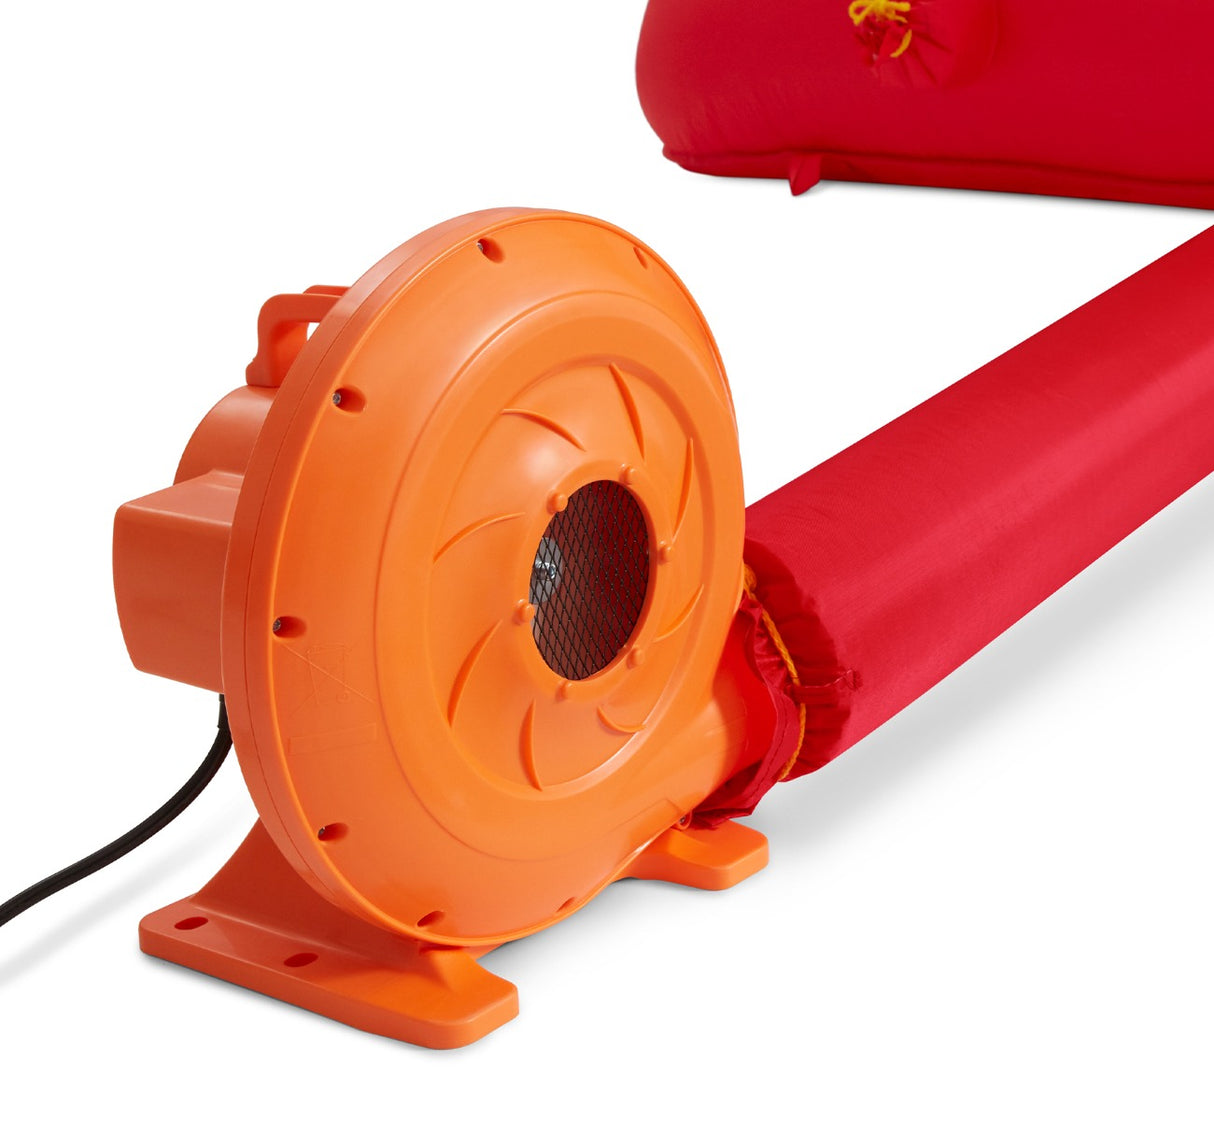 Backyard Bouncer Jr's Included Air Blower